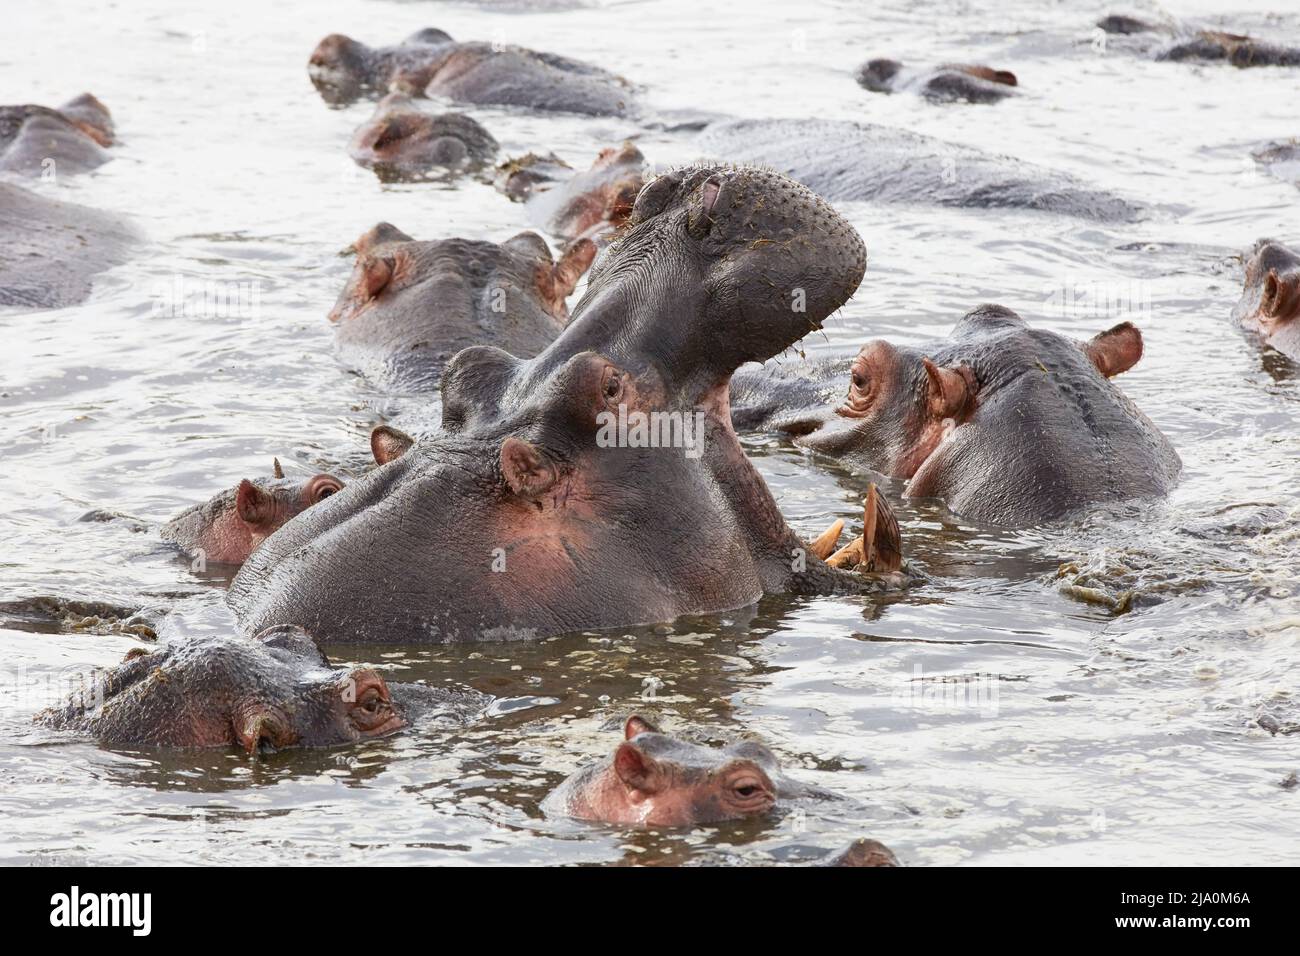 A group of Hippos (Hippopotamus) bathing in a pound of the Central Serengeti National Park, Tanzania, Africa. Stock Photo